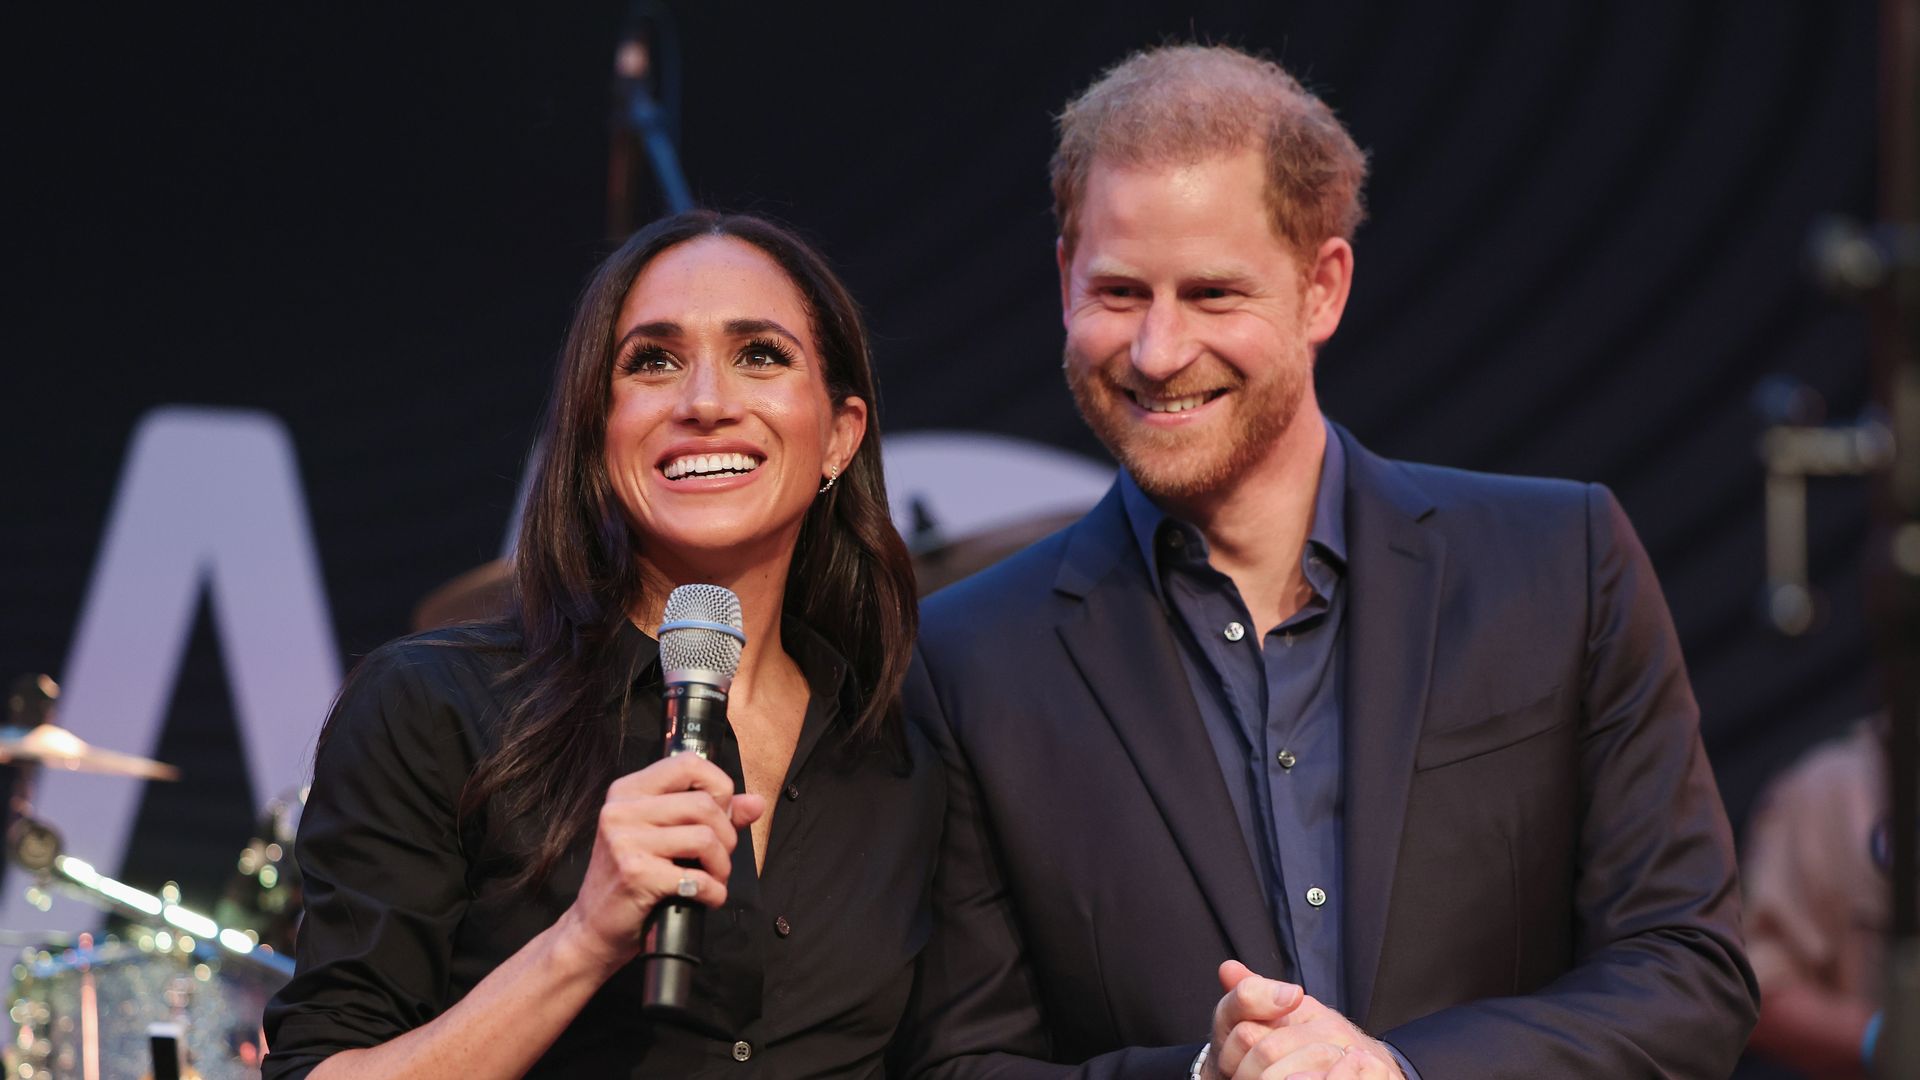 Harry and Meghan on stage at the Friends @ Home Event in Dusseldorf